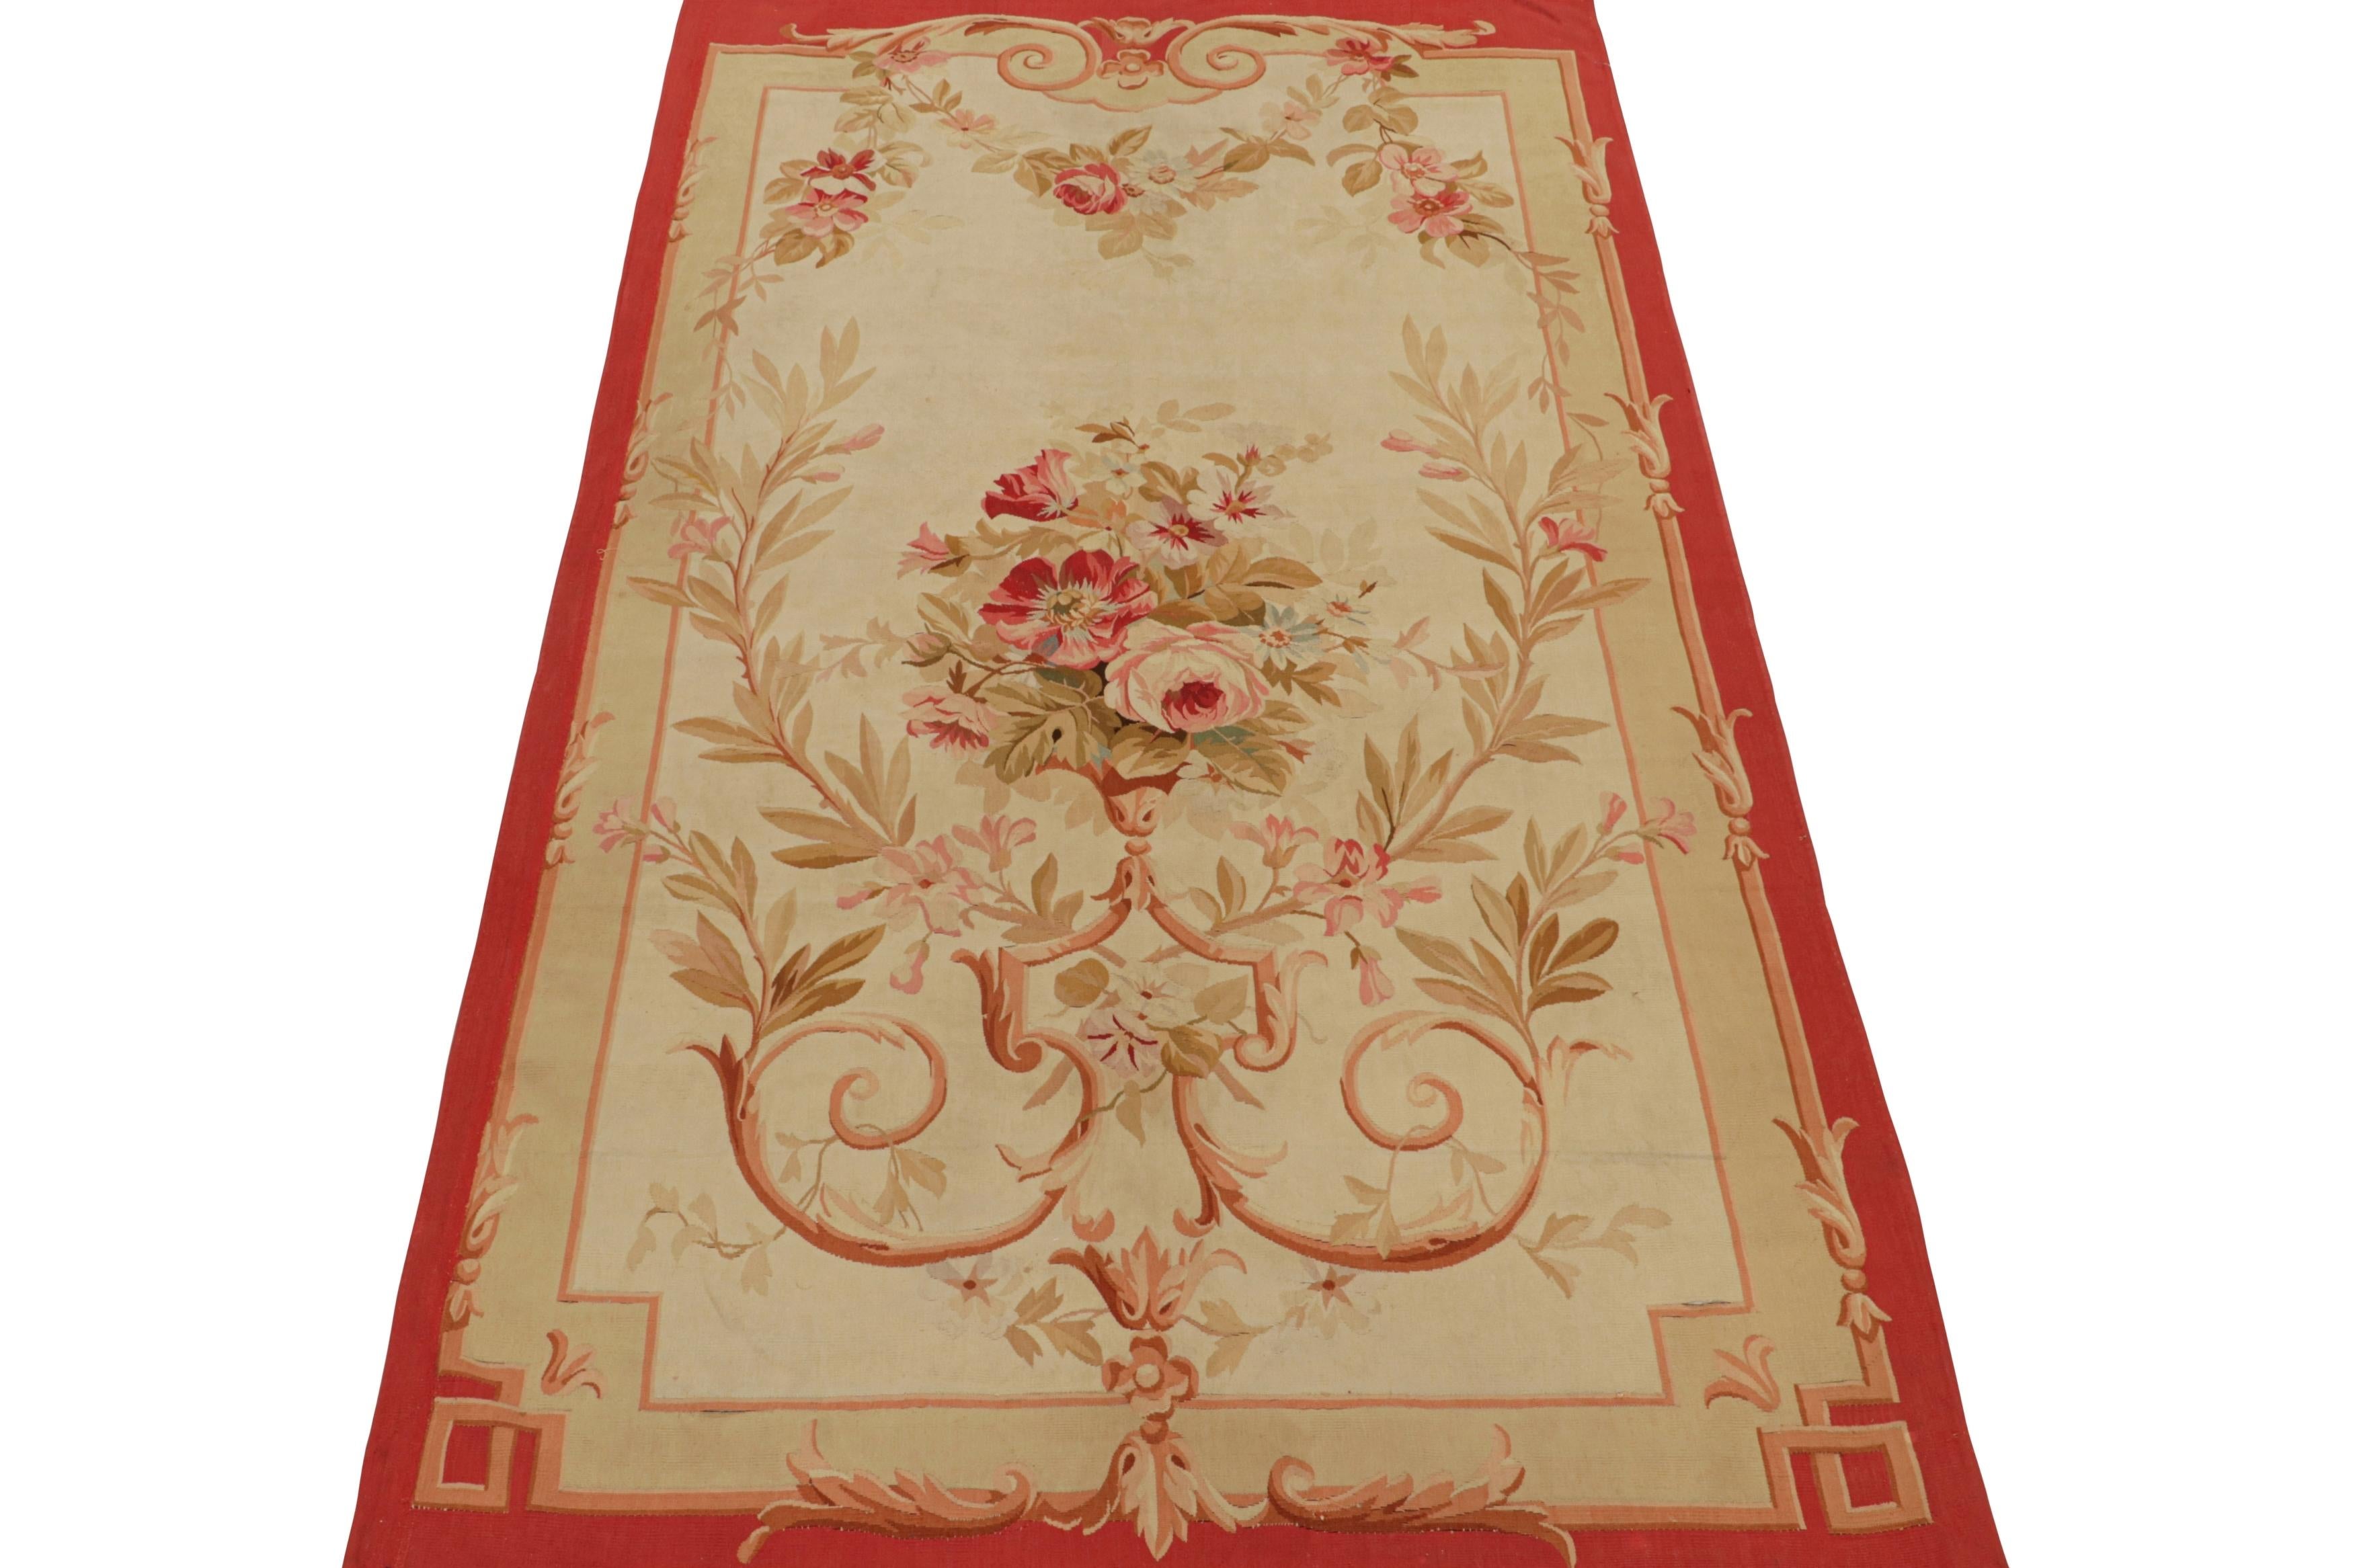 French Antique Aubusson Flatweave Rug in Beige with Floral Patterns, from Rug & Kilim For Sale